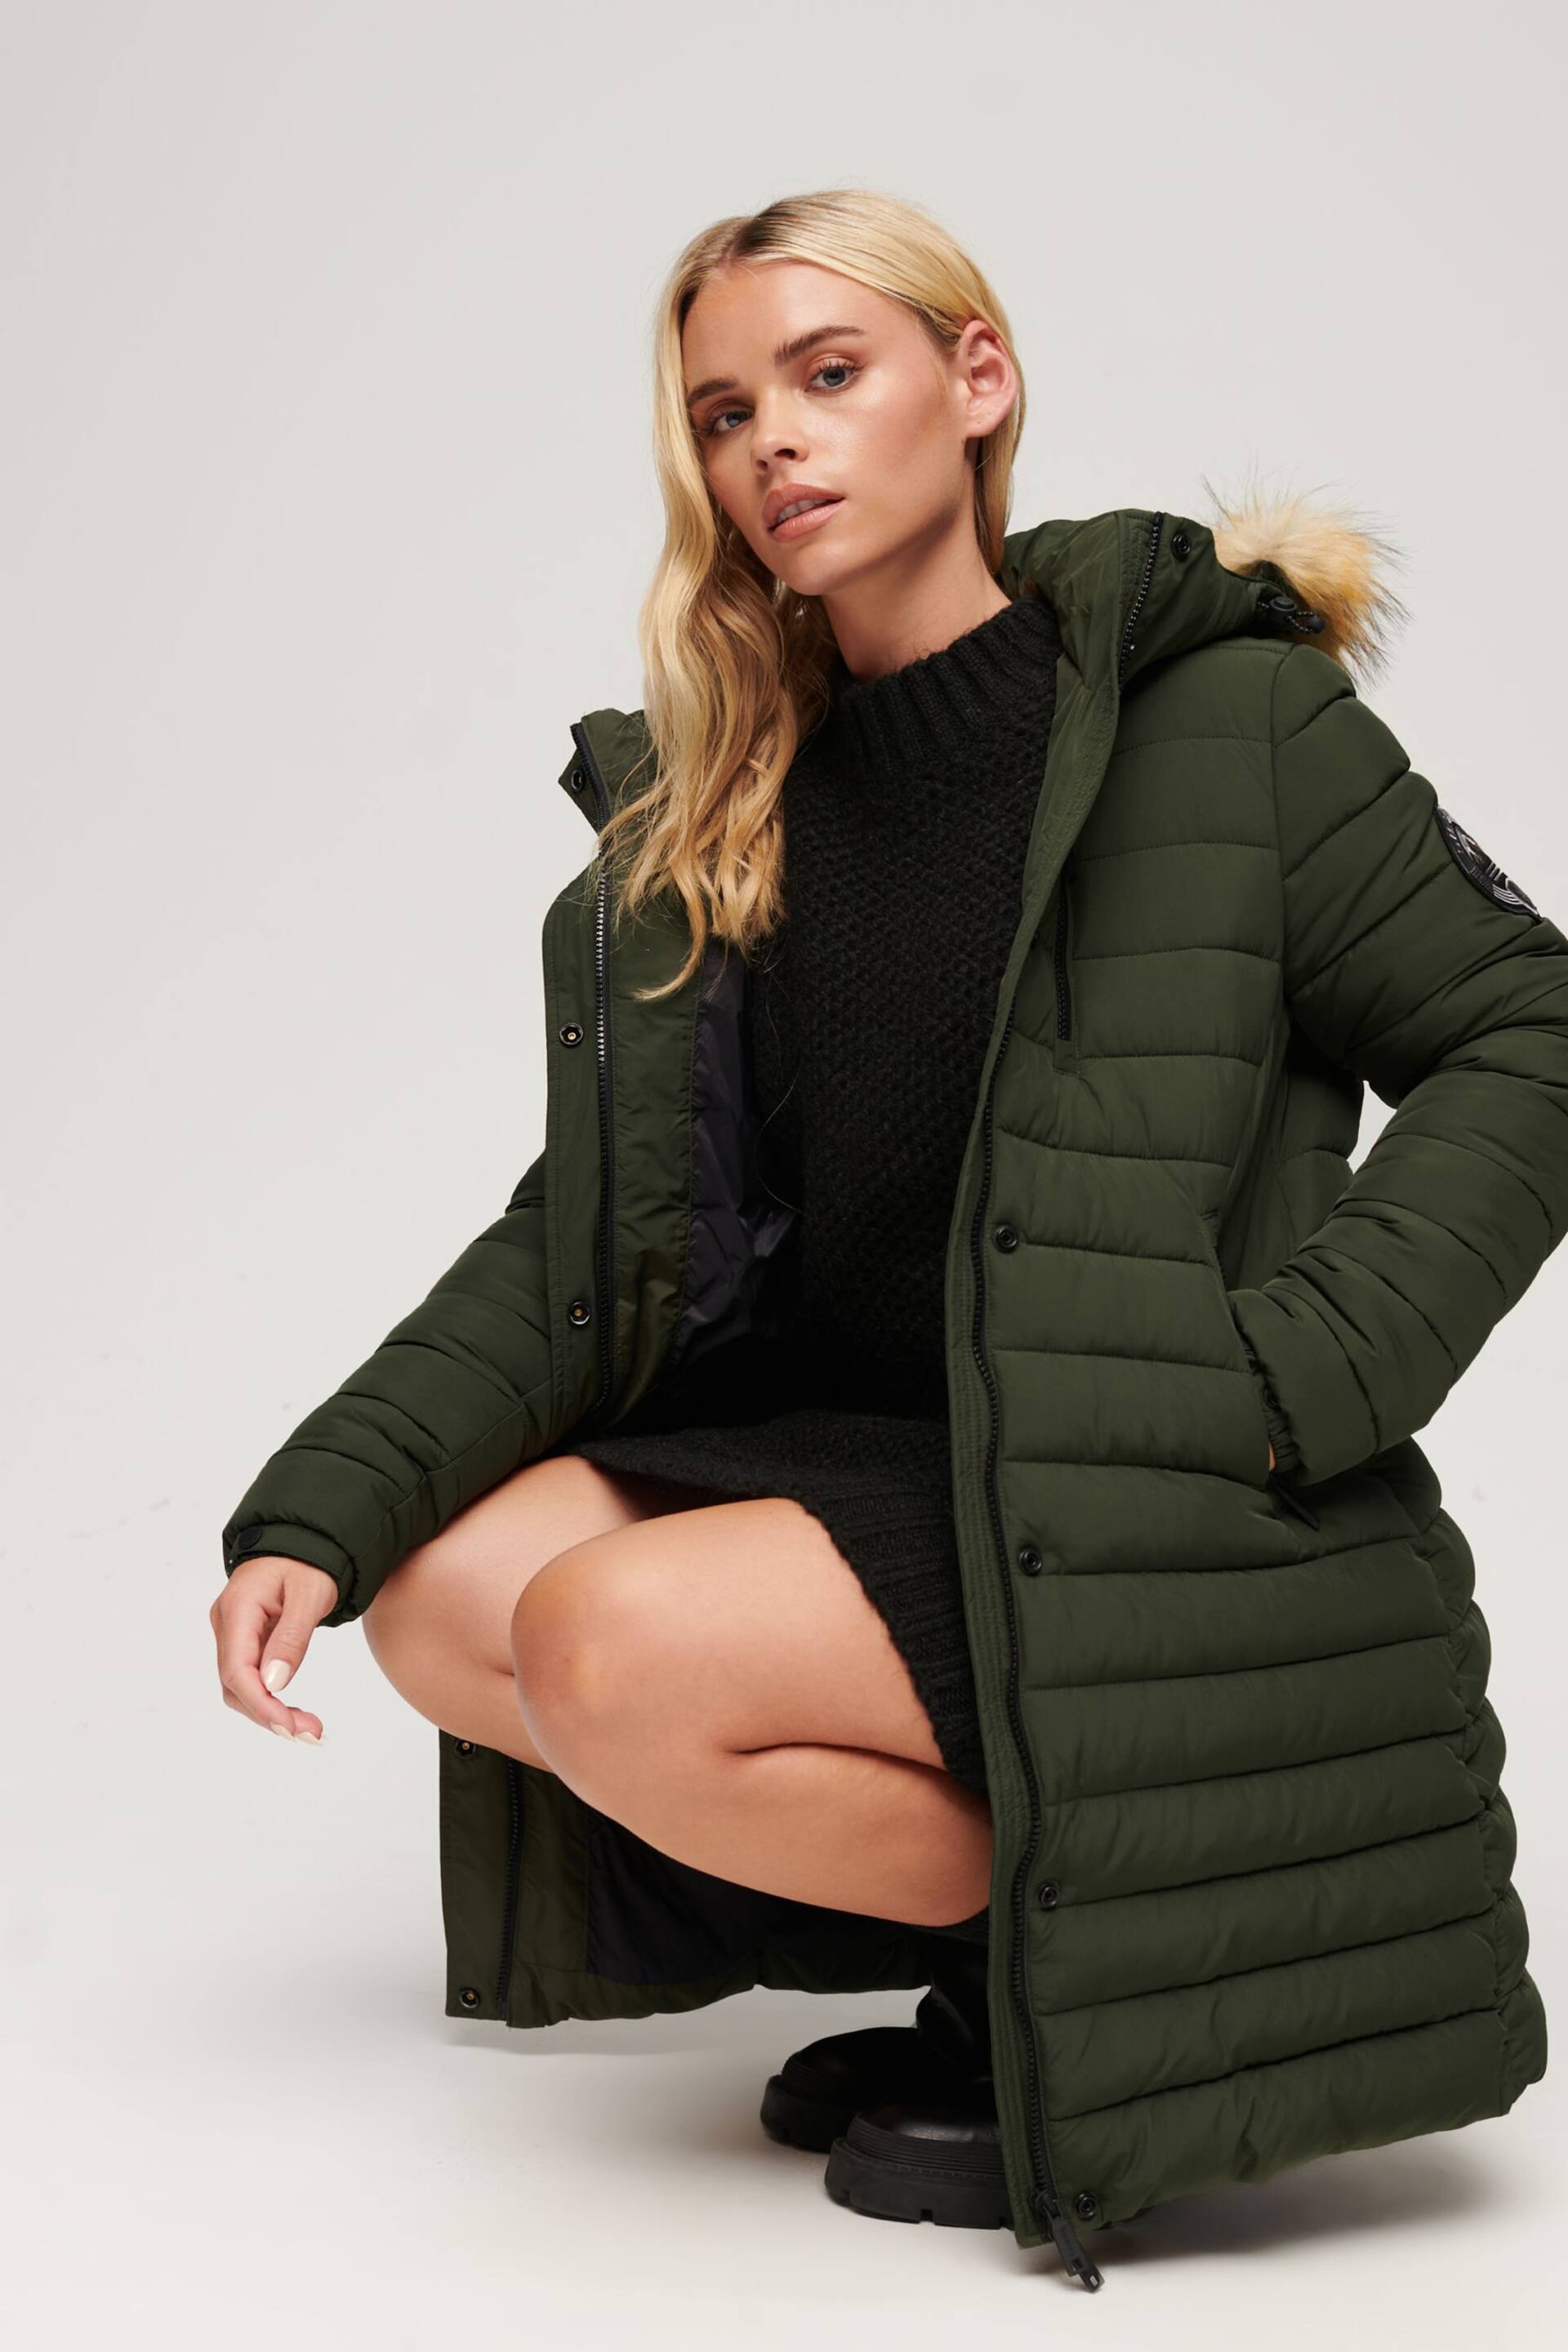 Superdry Green Fuji Hooded Mid Length Puffer Coat - Image 3 of 5